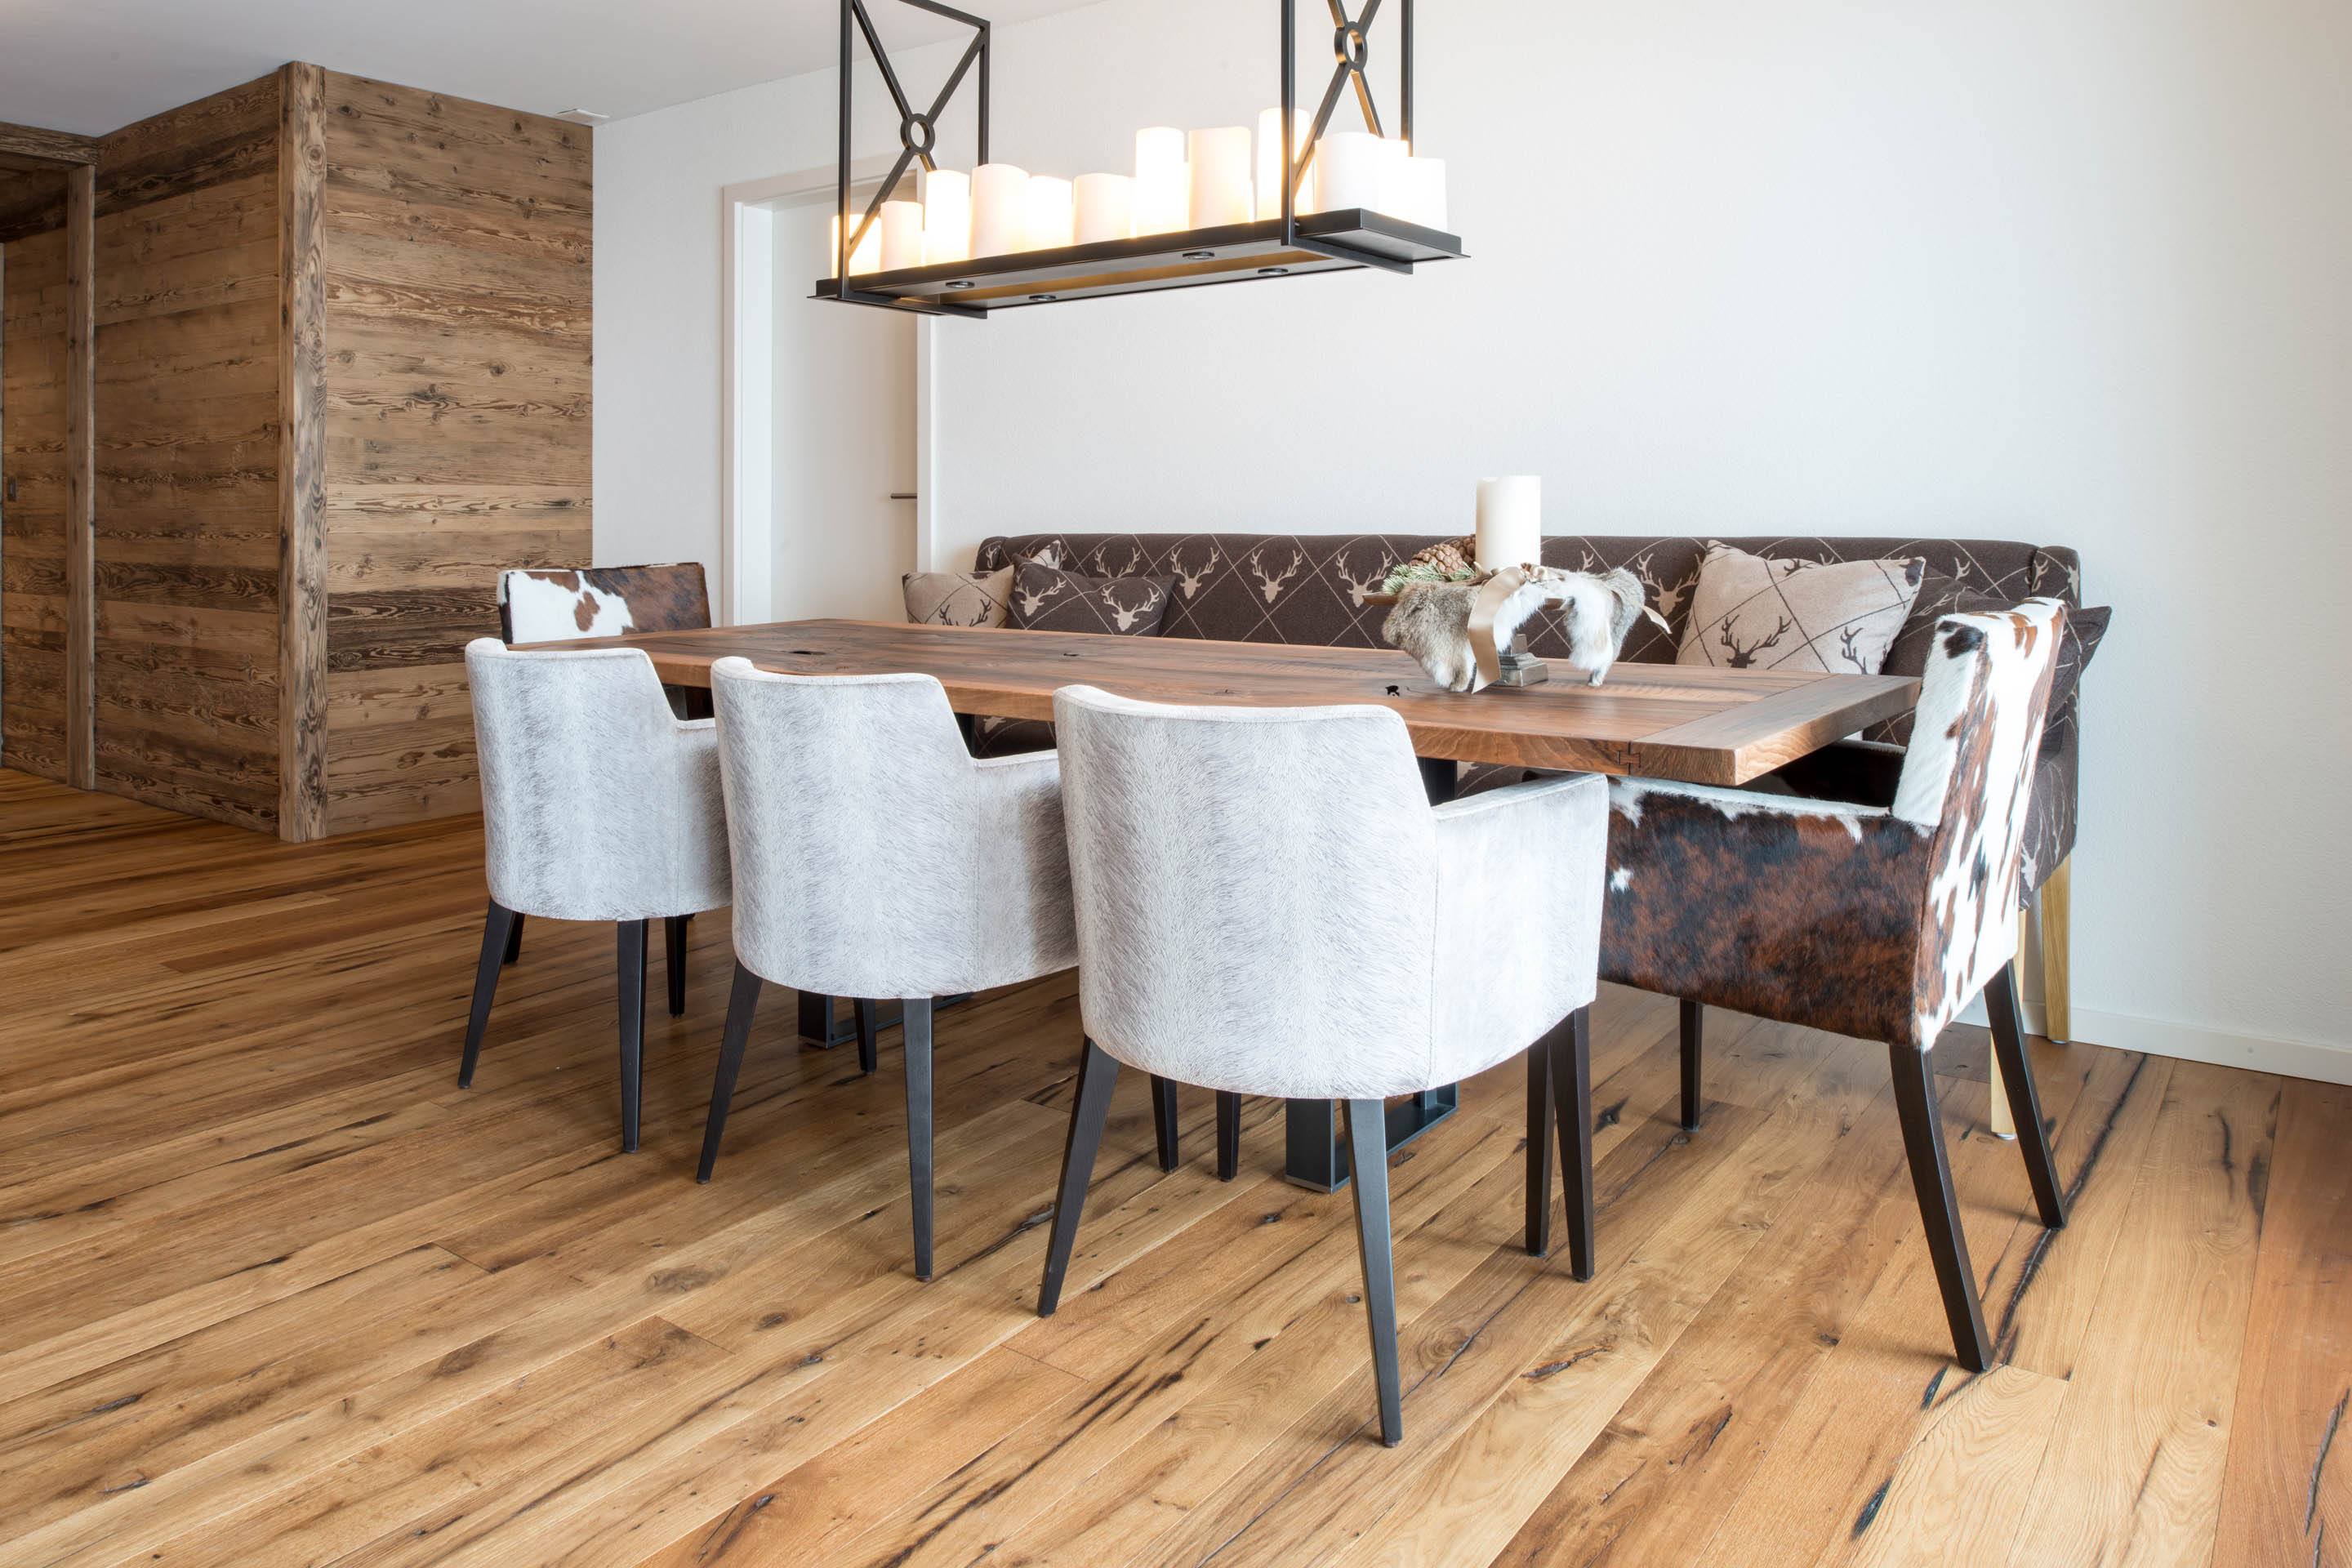 PRIVATE ALPINE STYLE APPARTMENT | Parquet collection "Fuerstliche Maxi-Dielen" reclaimed oak color 004 brushed and 3-layer panels reclaimed spruce/fir/pine type 2B chopped as well as 3-layer panels reclaimed spruce/fir/pine type 1G brushed